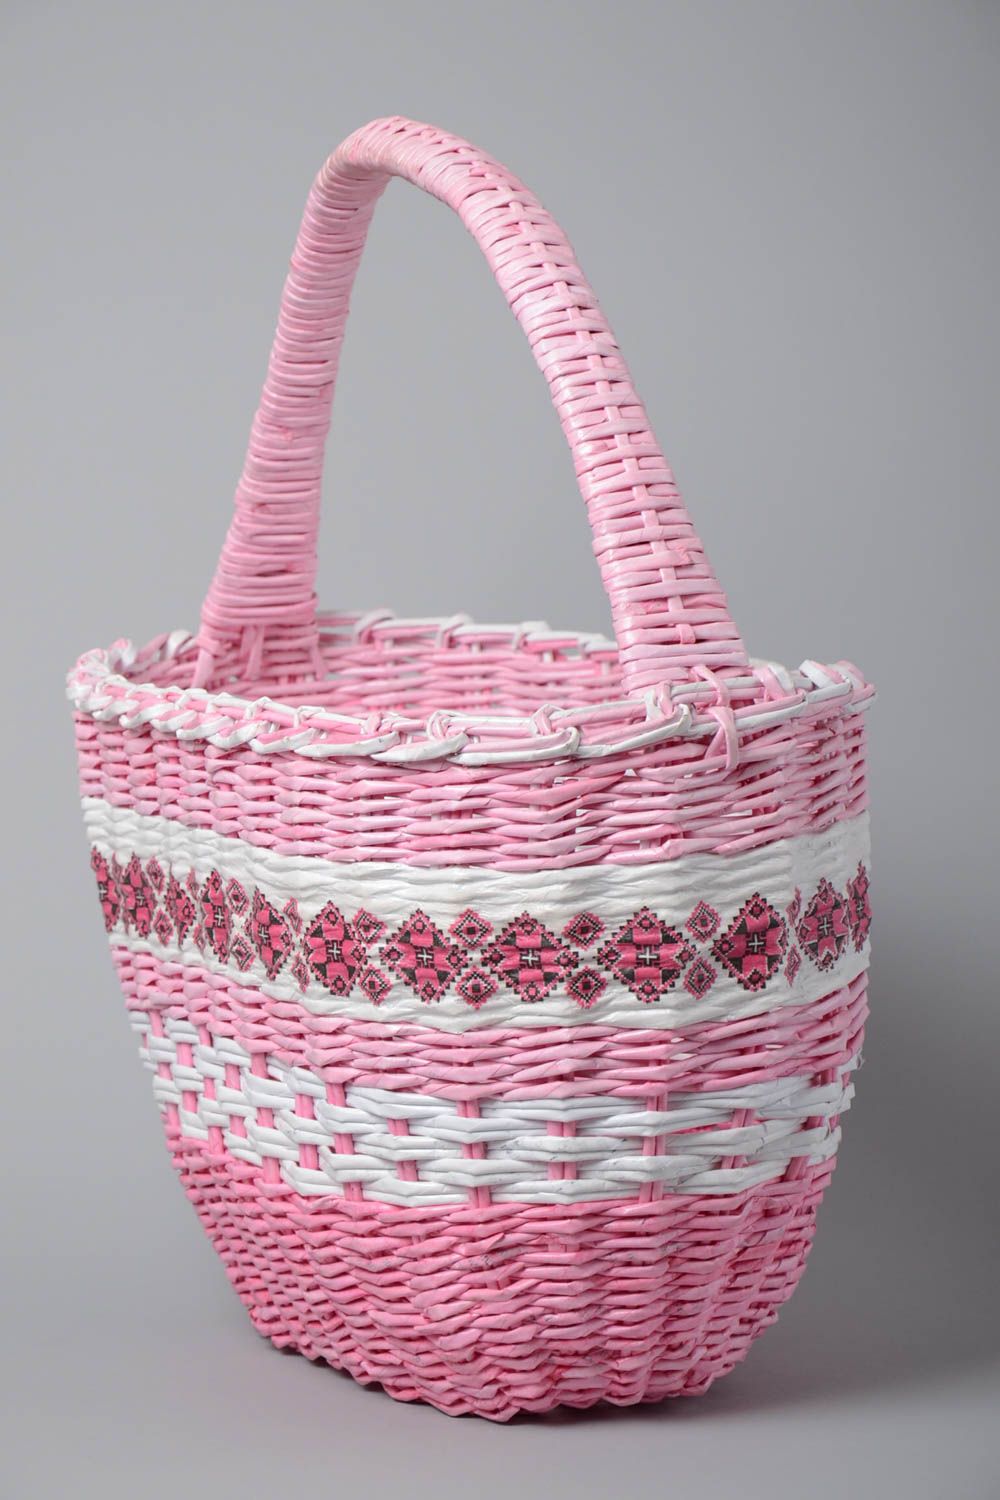 Woven basket made of paper rod small pink with white handmade photo 2